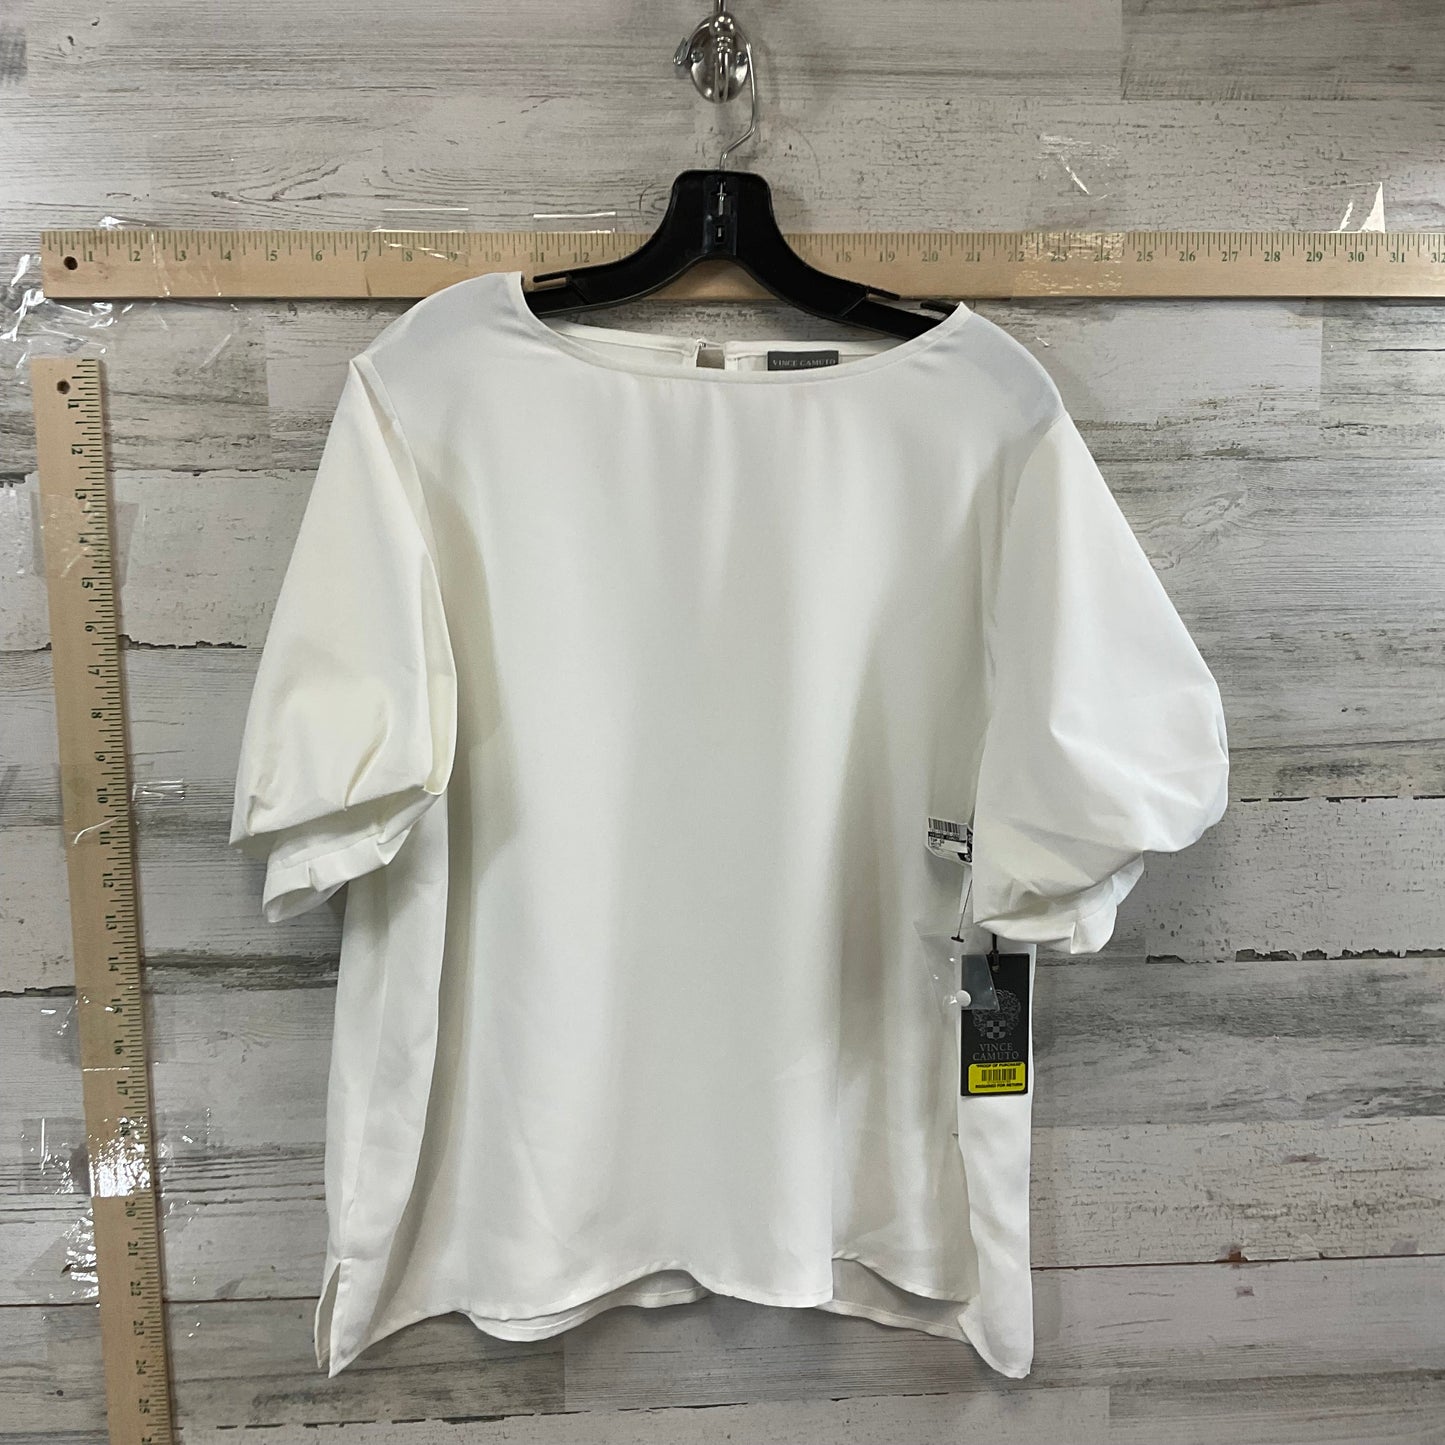 White Top Short Sleeve Vince Camuto, Size L